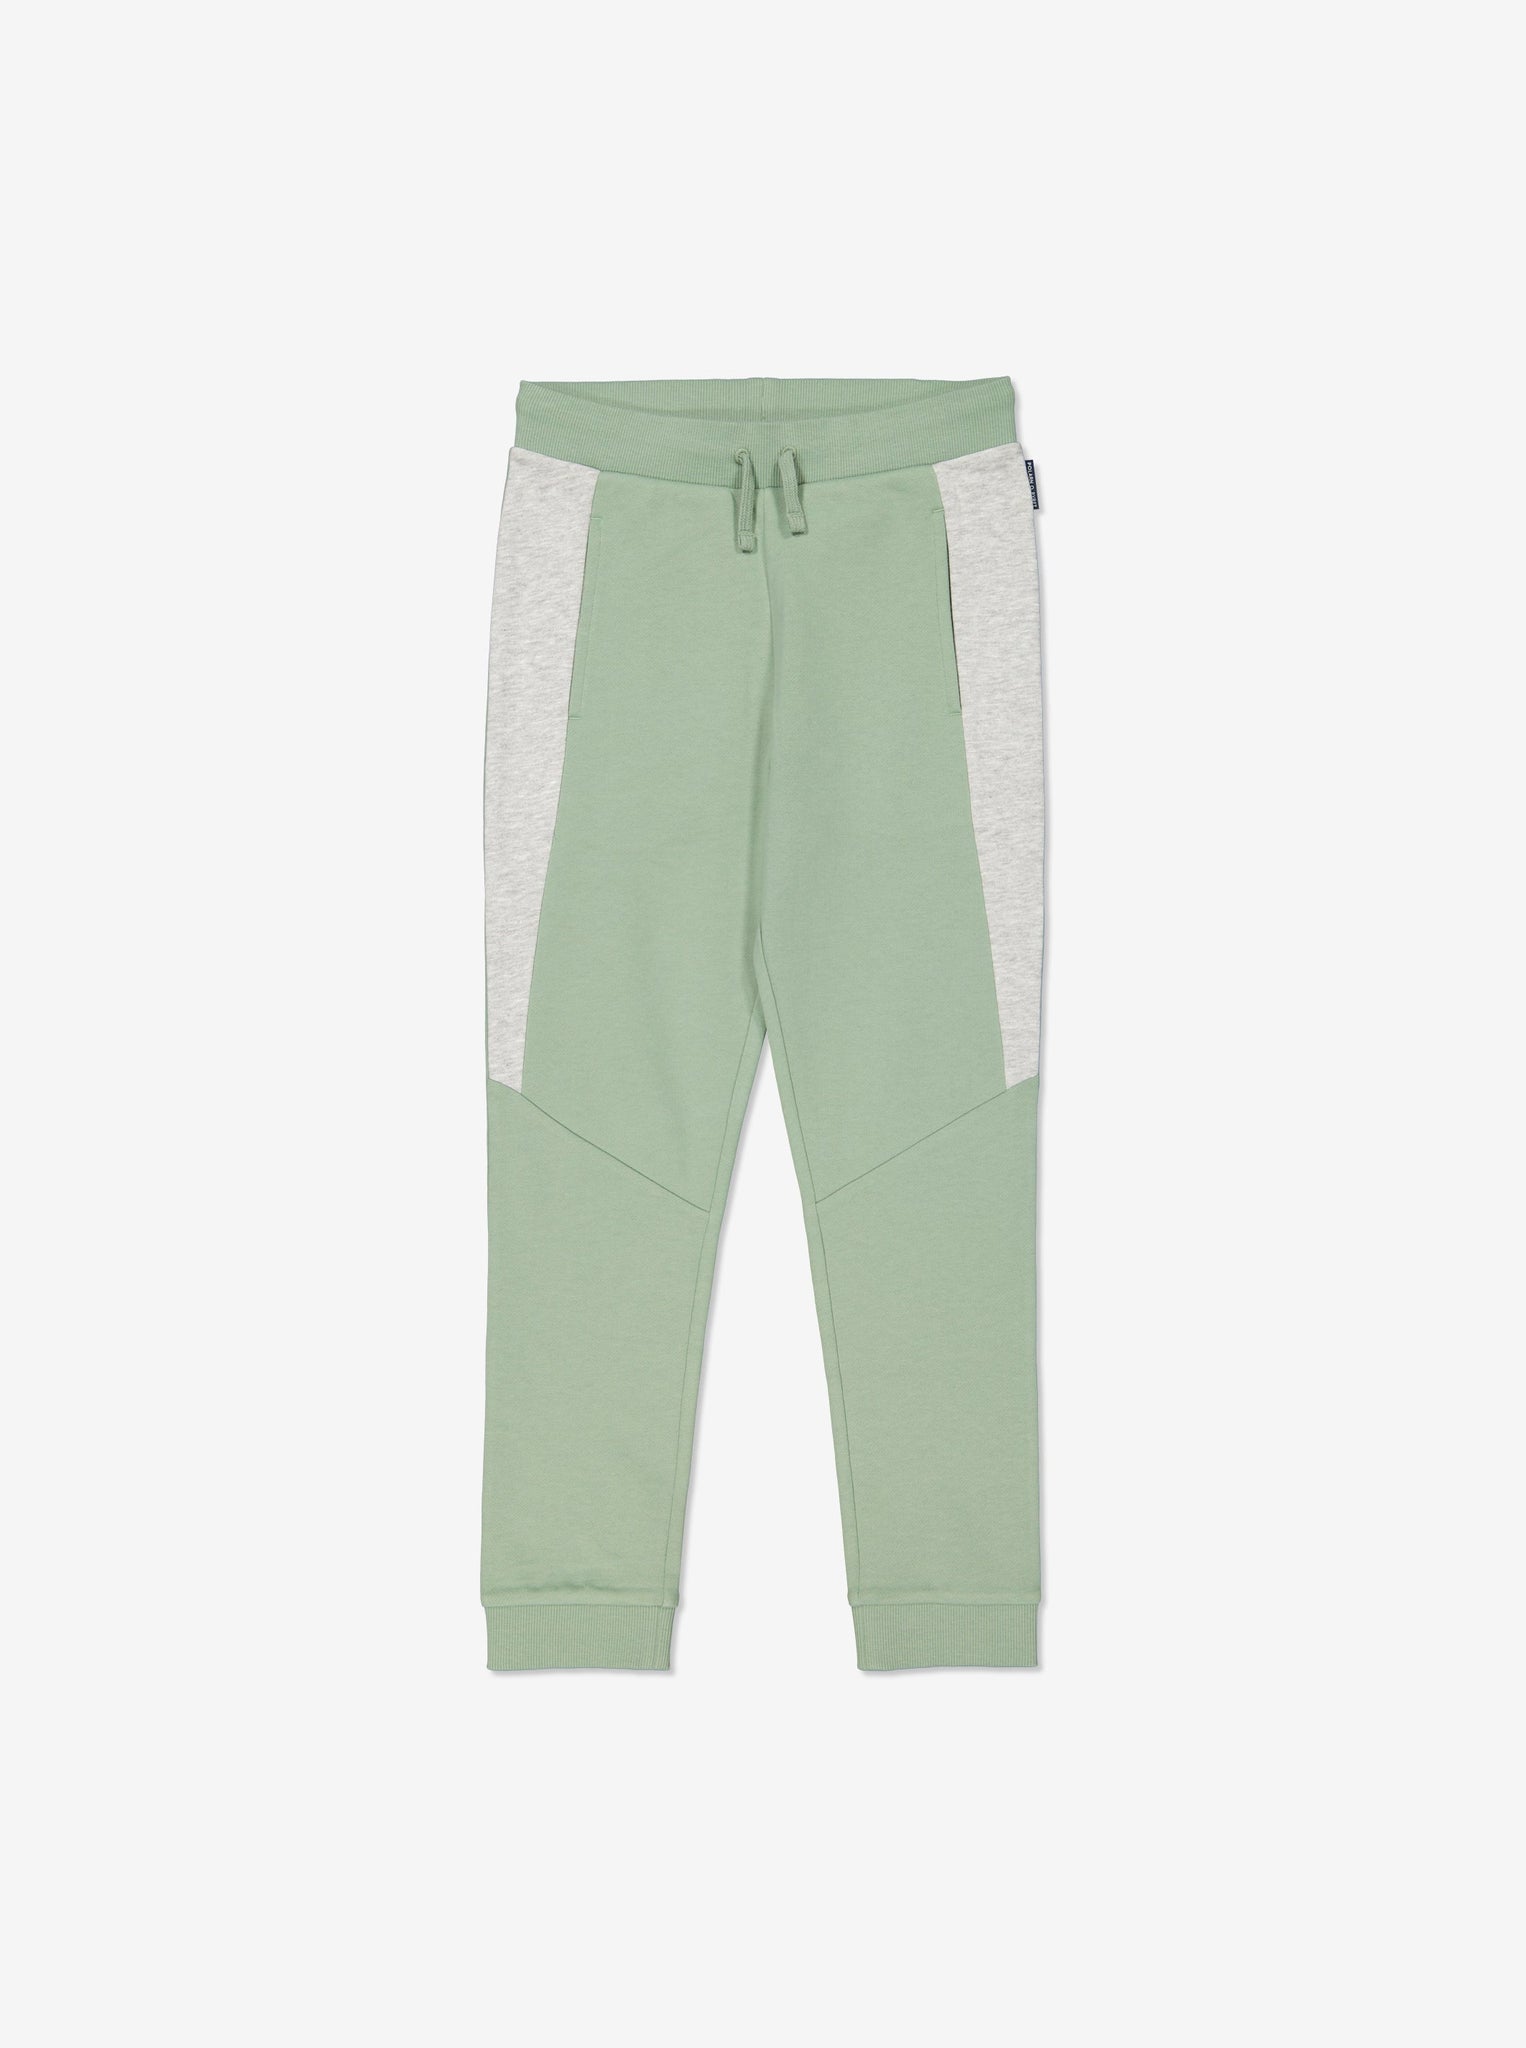  Organic Cotton Green Kids Joggers from Polarn O. Pyret Kidswear. Made from sustainable materials.